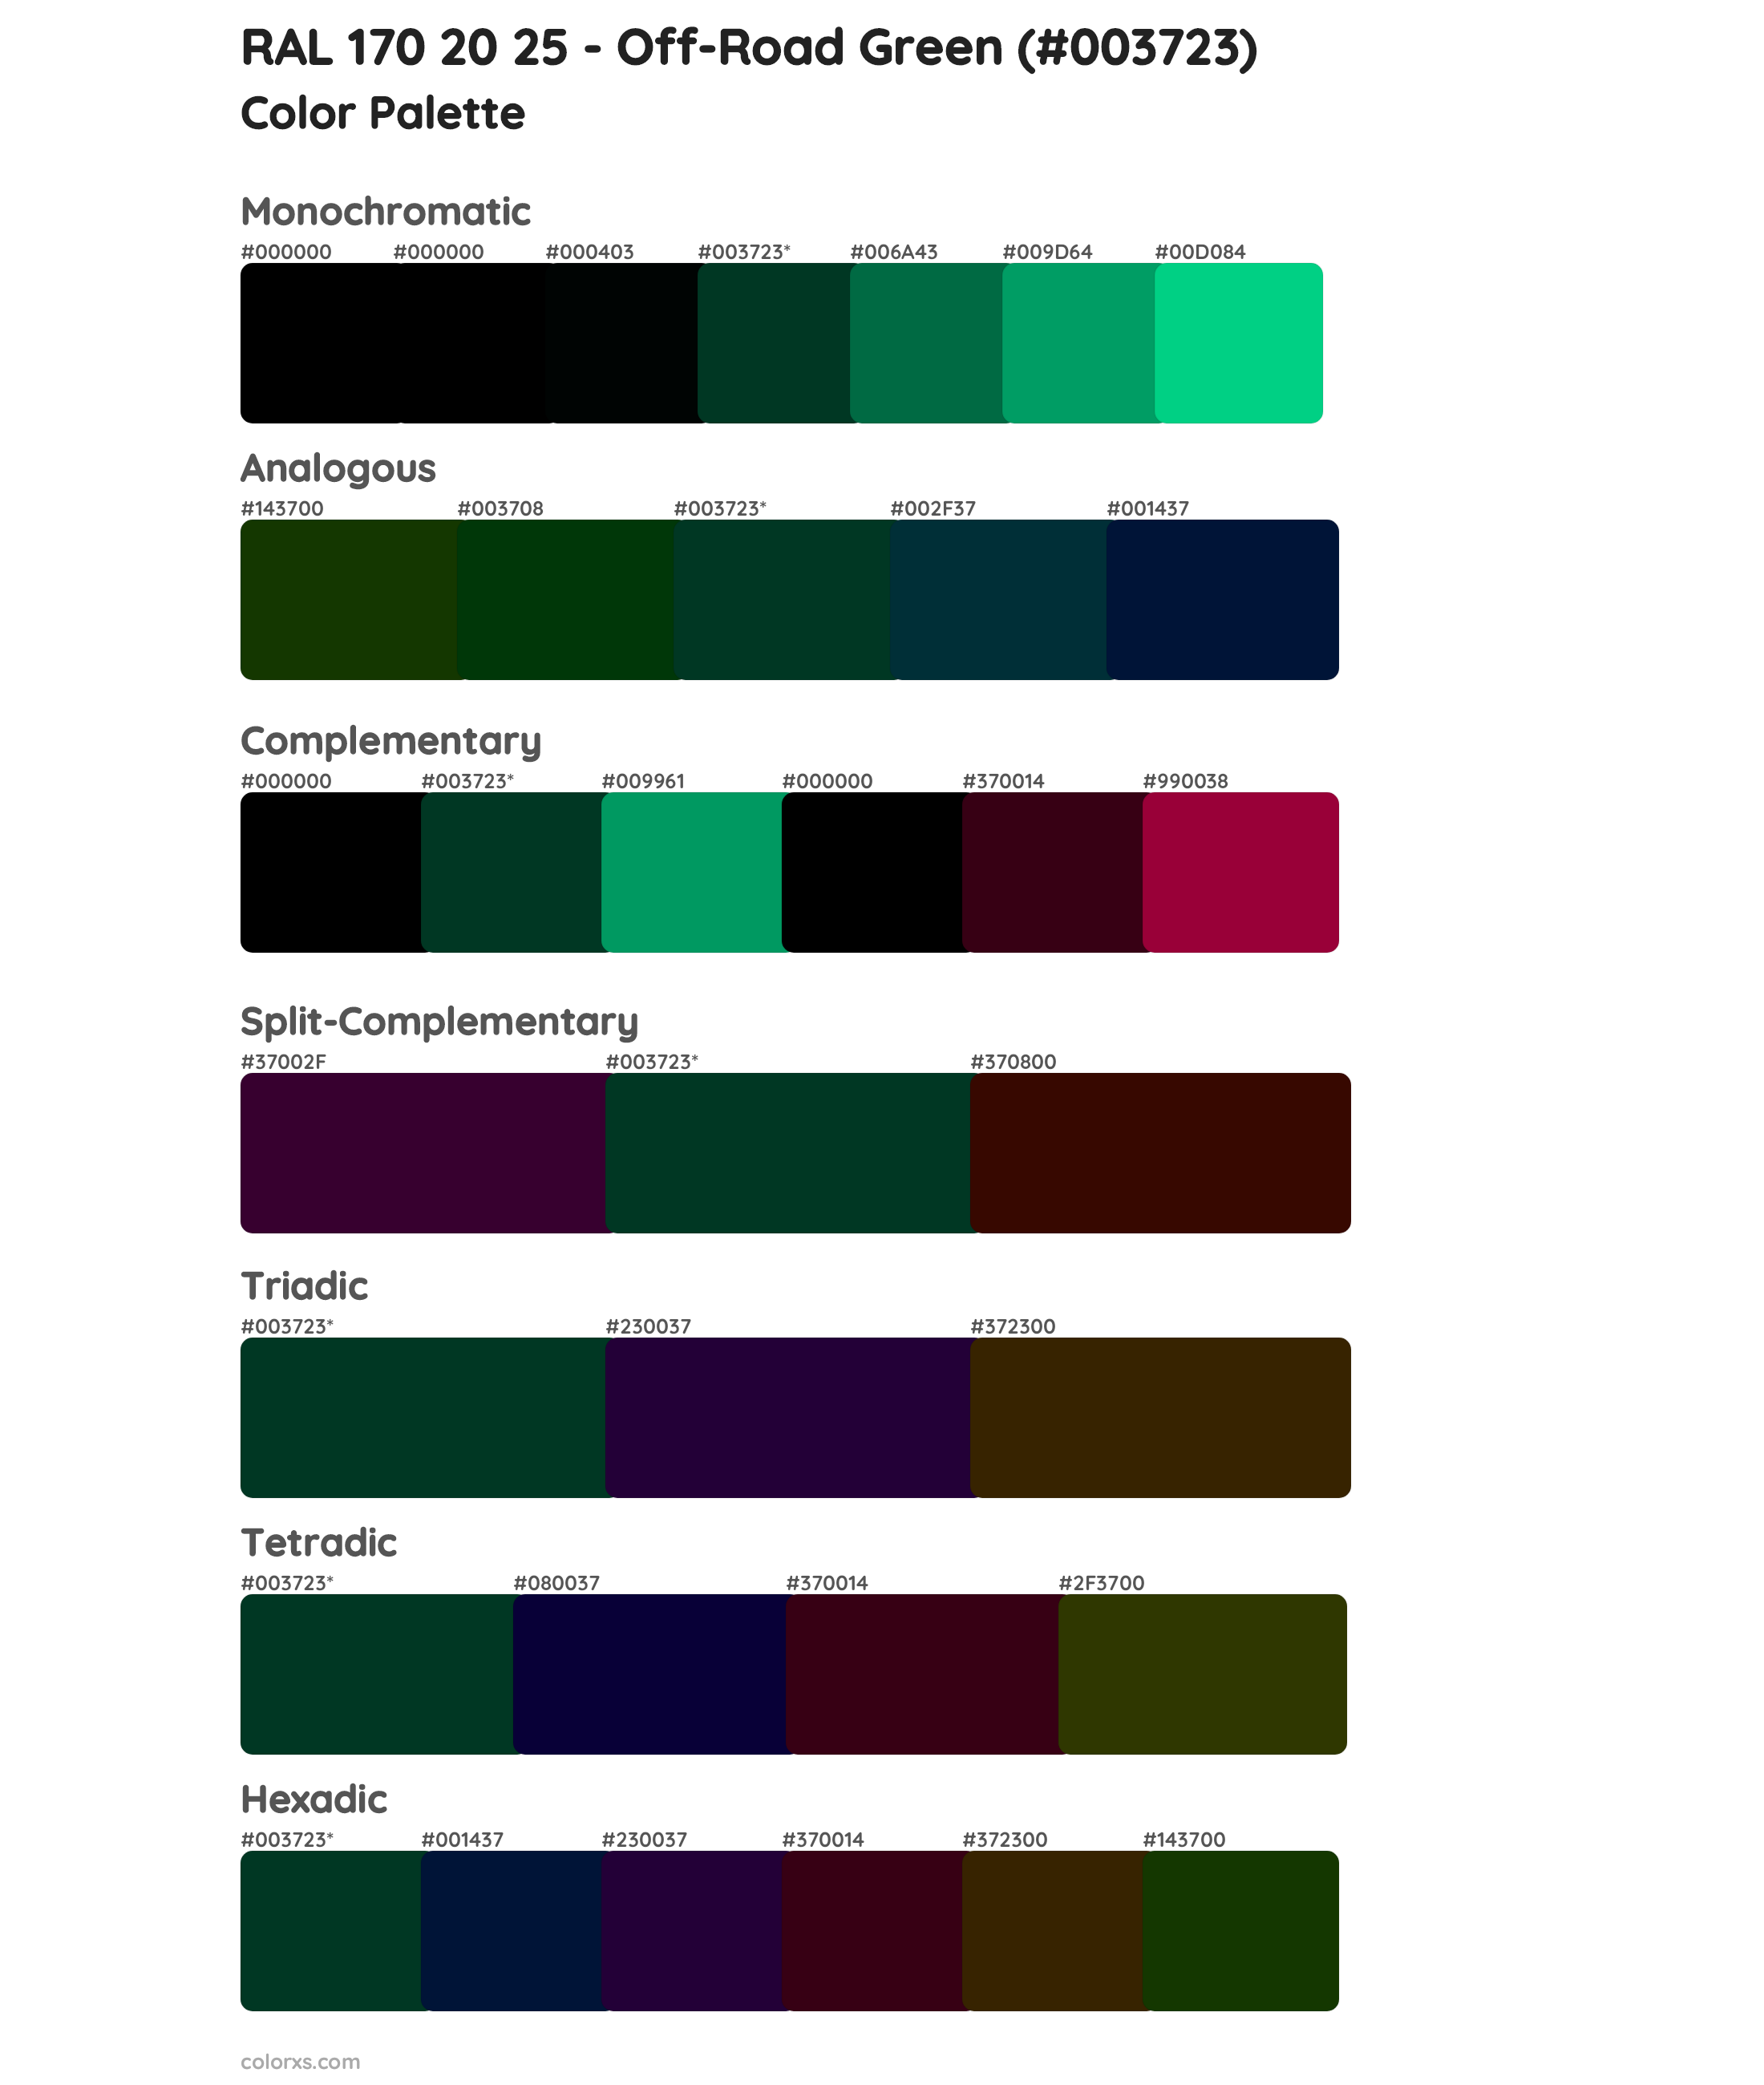 RAL 170 20 25 - Off-Road Green Color Scheme Palettes